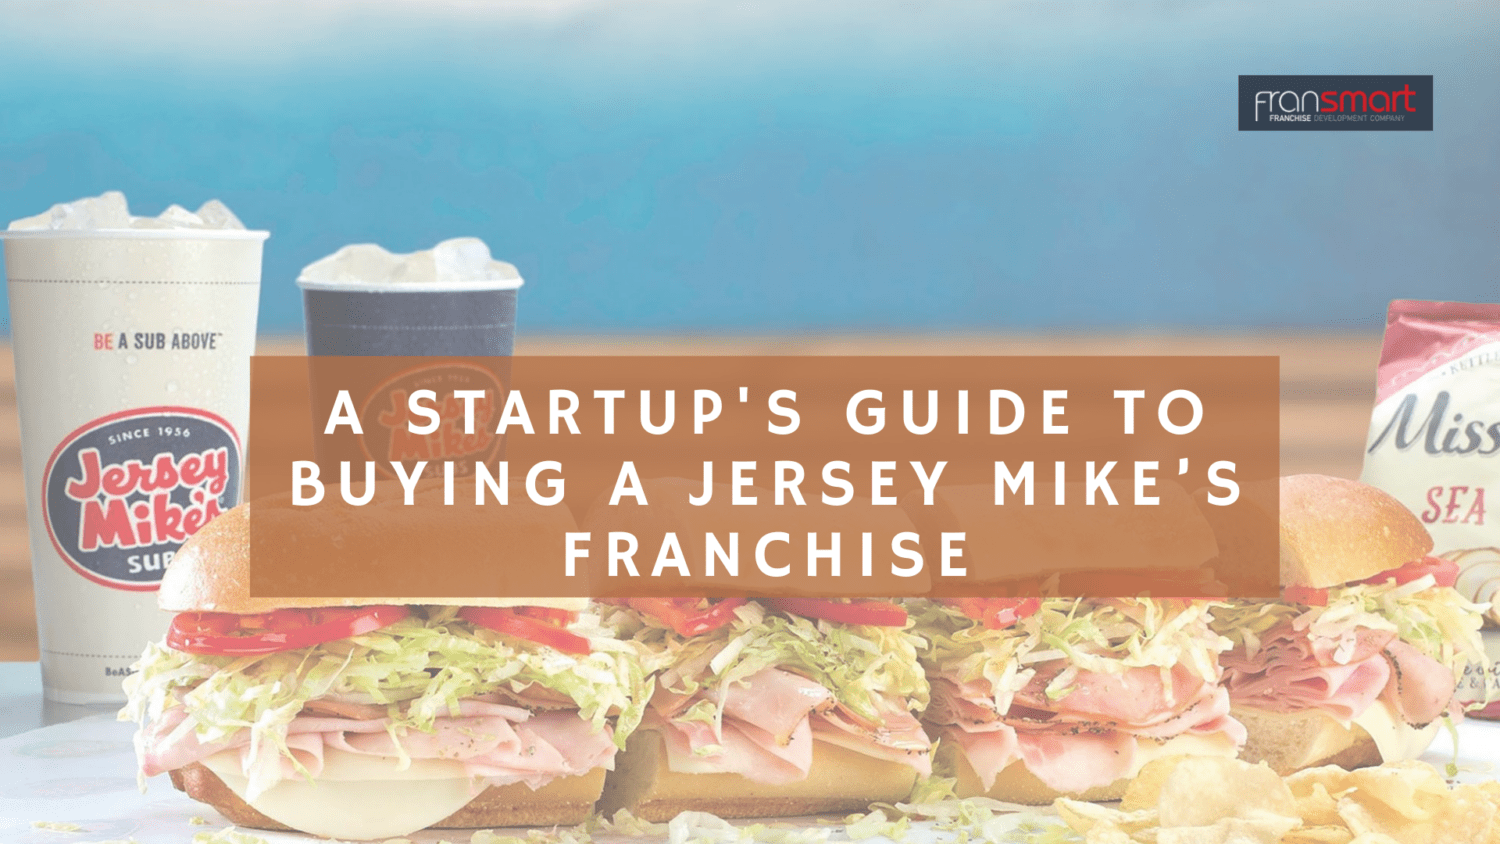 Sub sandwiches with the words A startup's guide to buying a Jersey Mike's franchise above